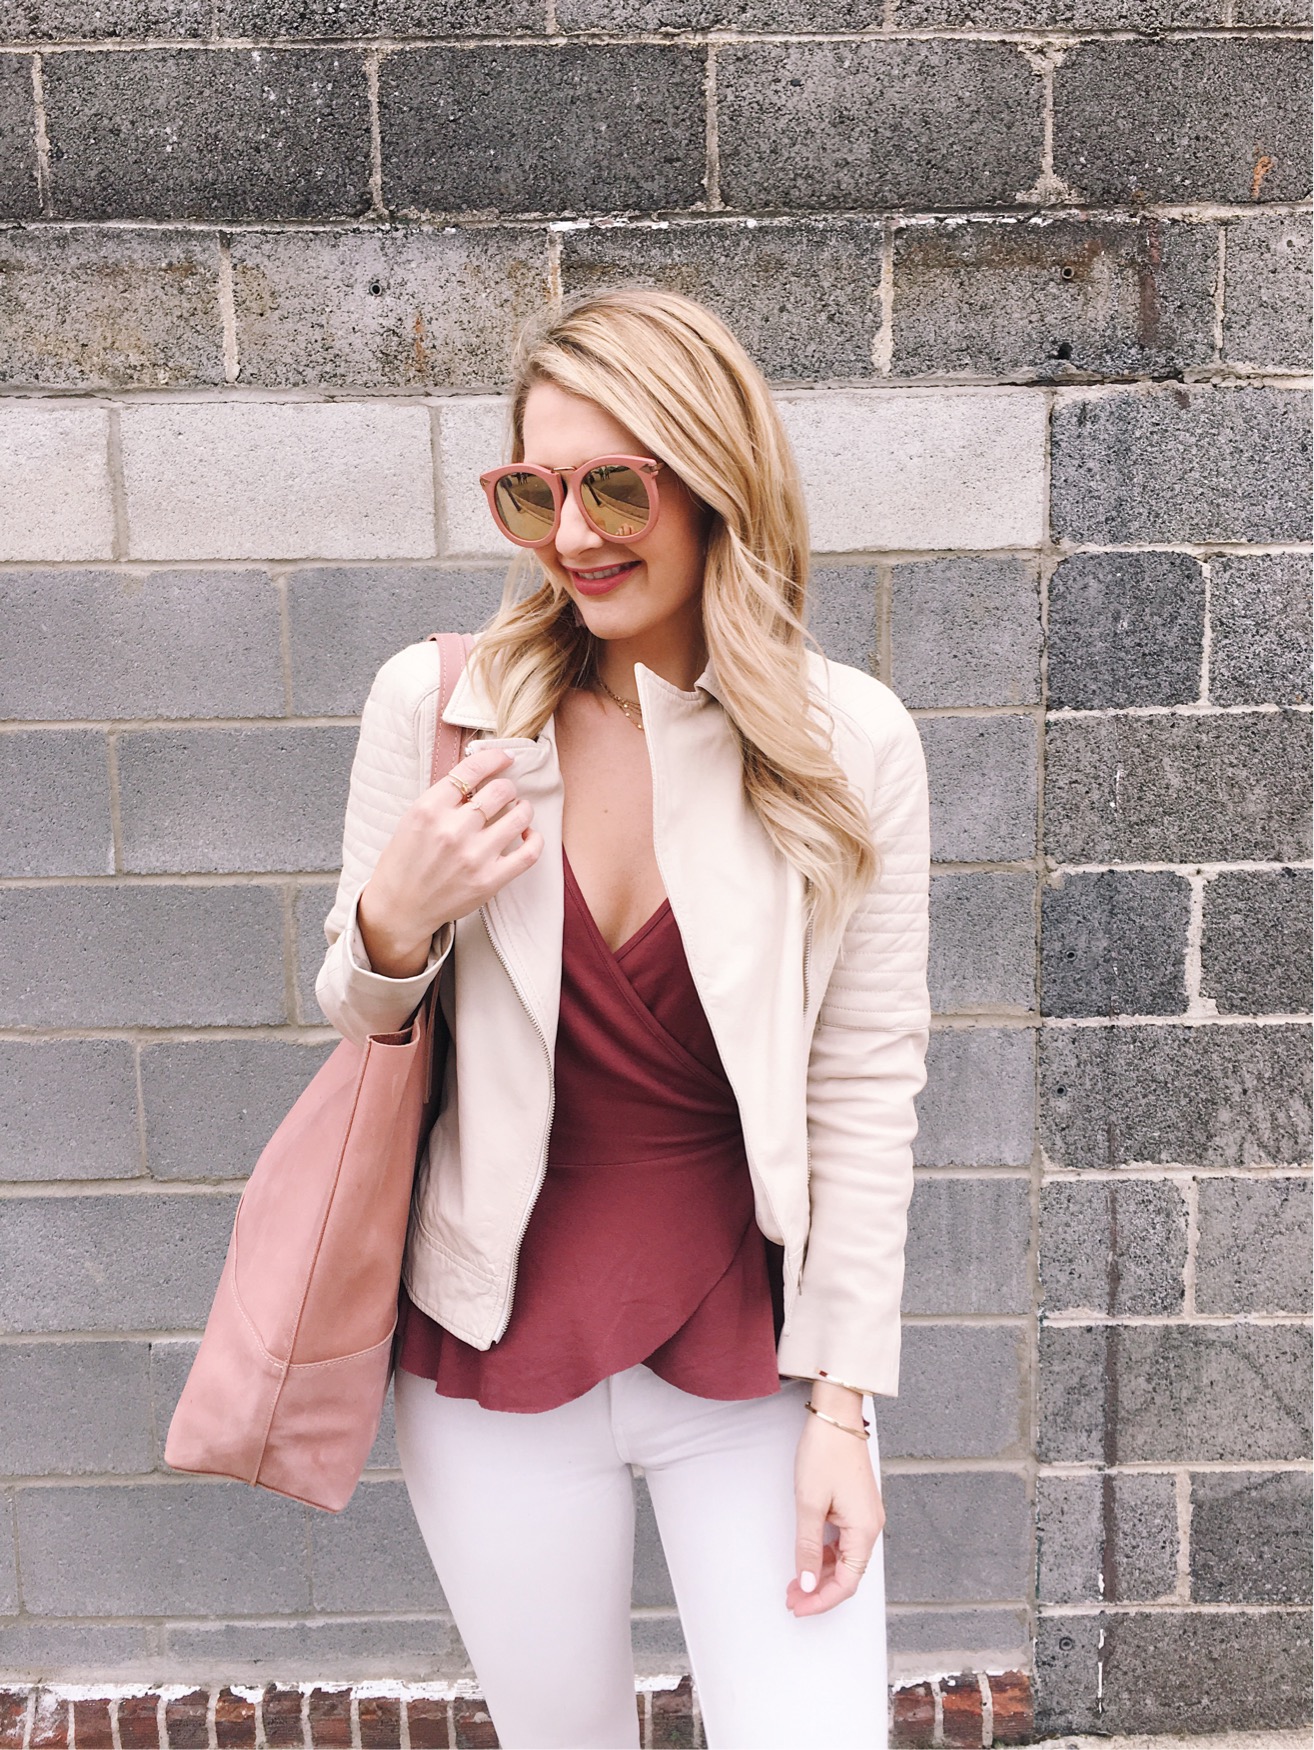 Wrap ruffled top in burgundy with a white moto jacket and pink sunnies!